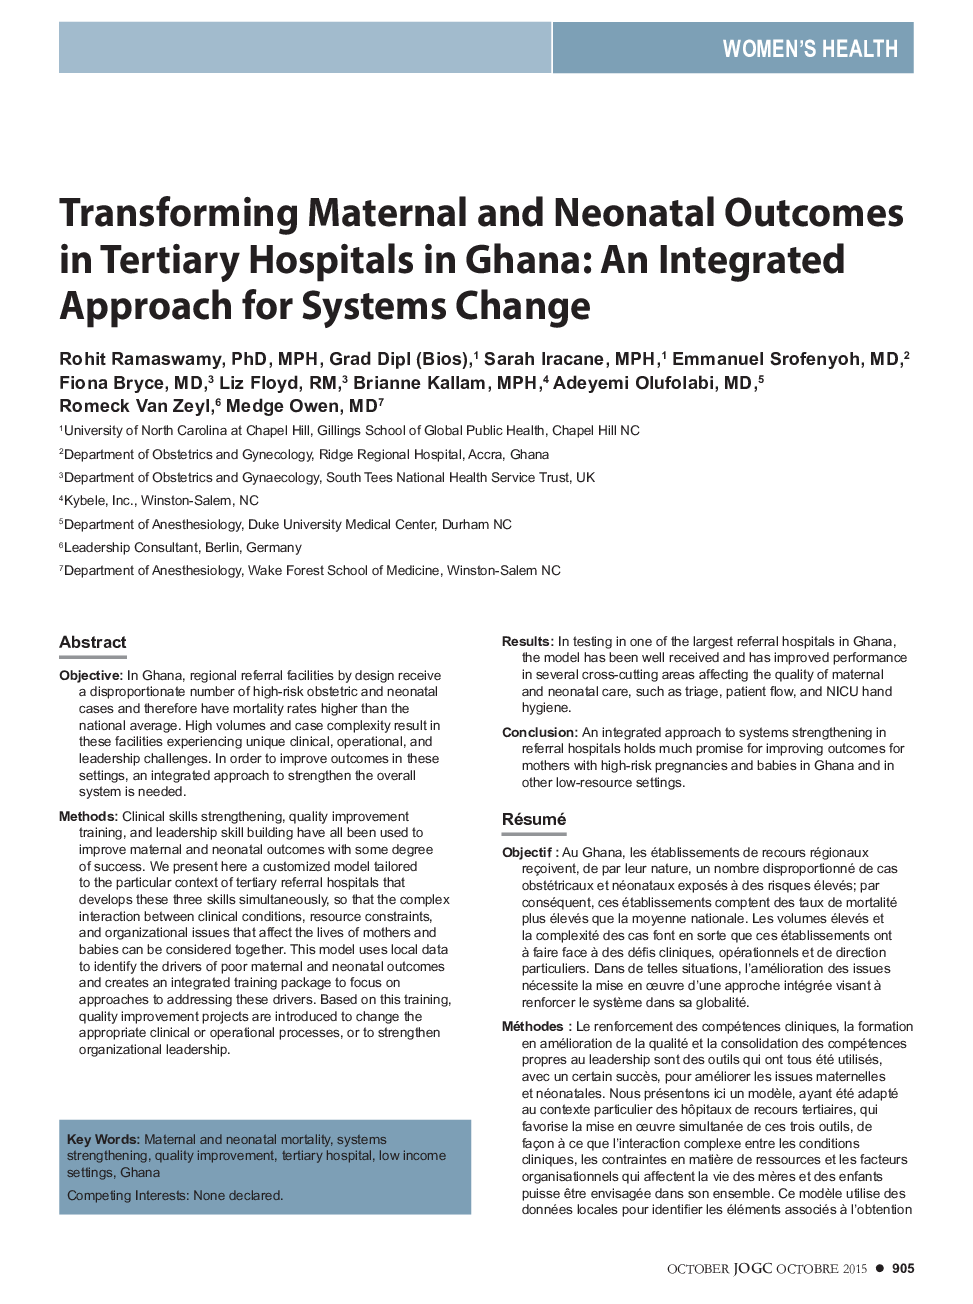 Transforming Maternal and Neonatal Outcomes in Tertiary Hospitals in Ghana: An Integrated Approach for Systems Change